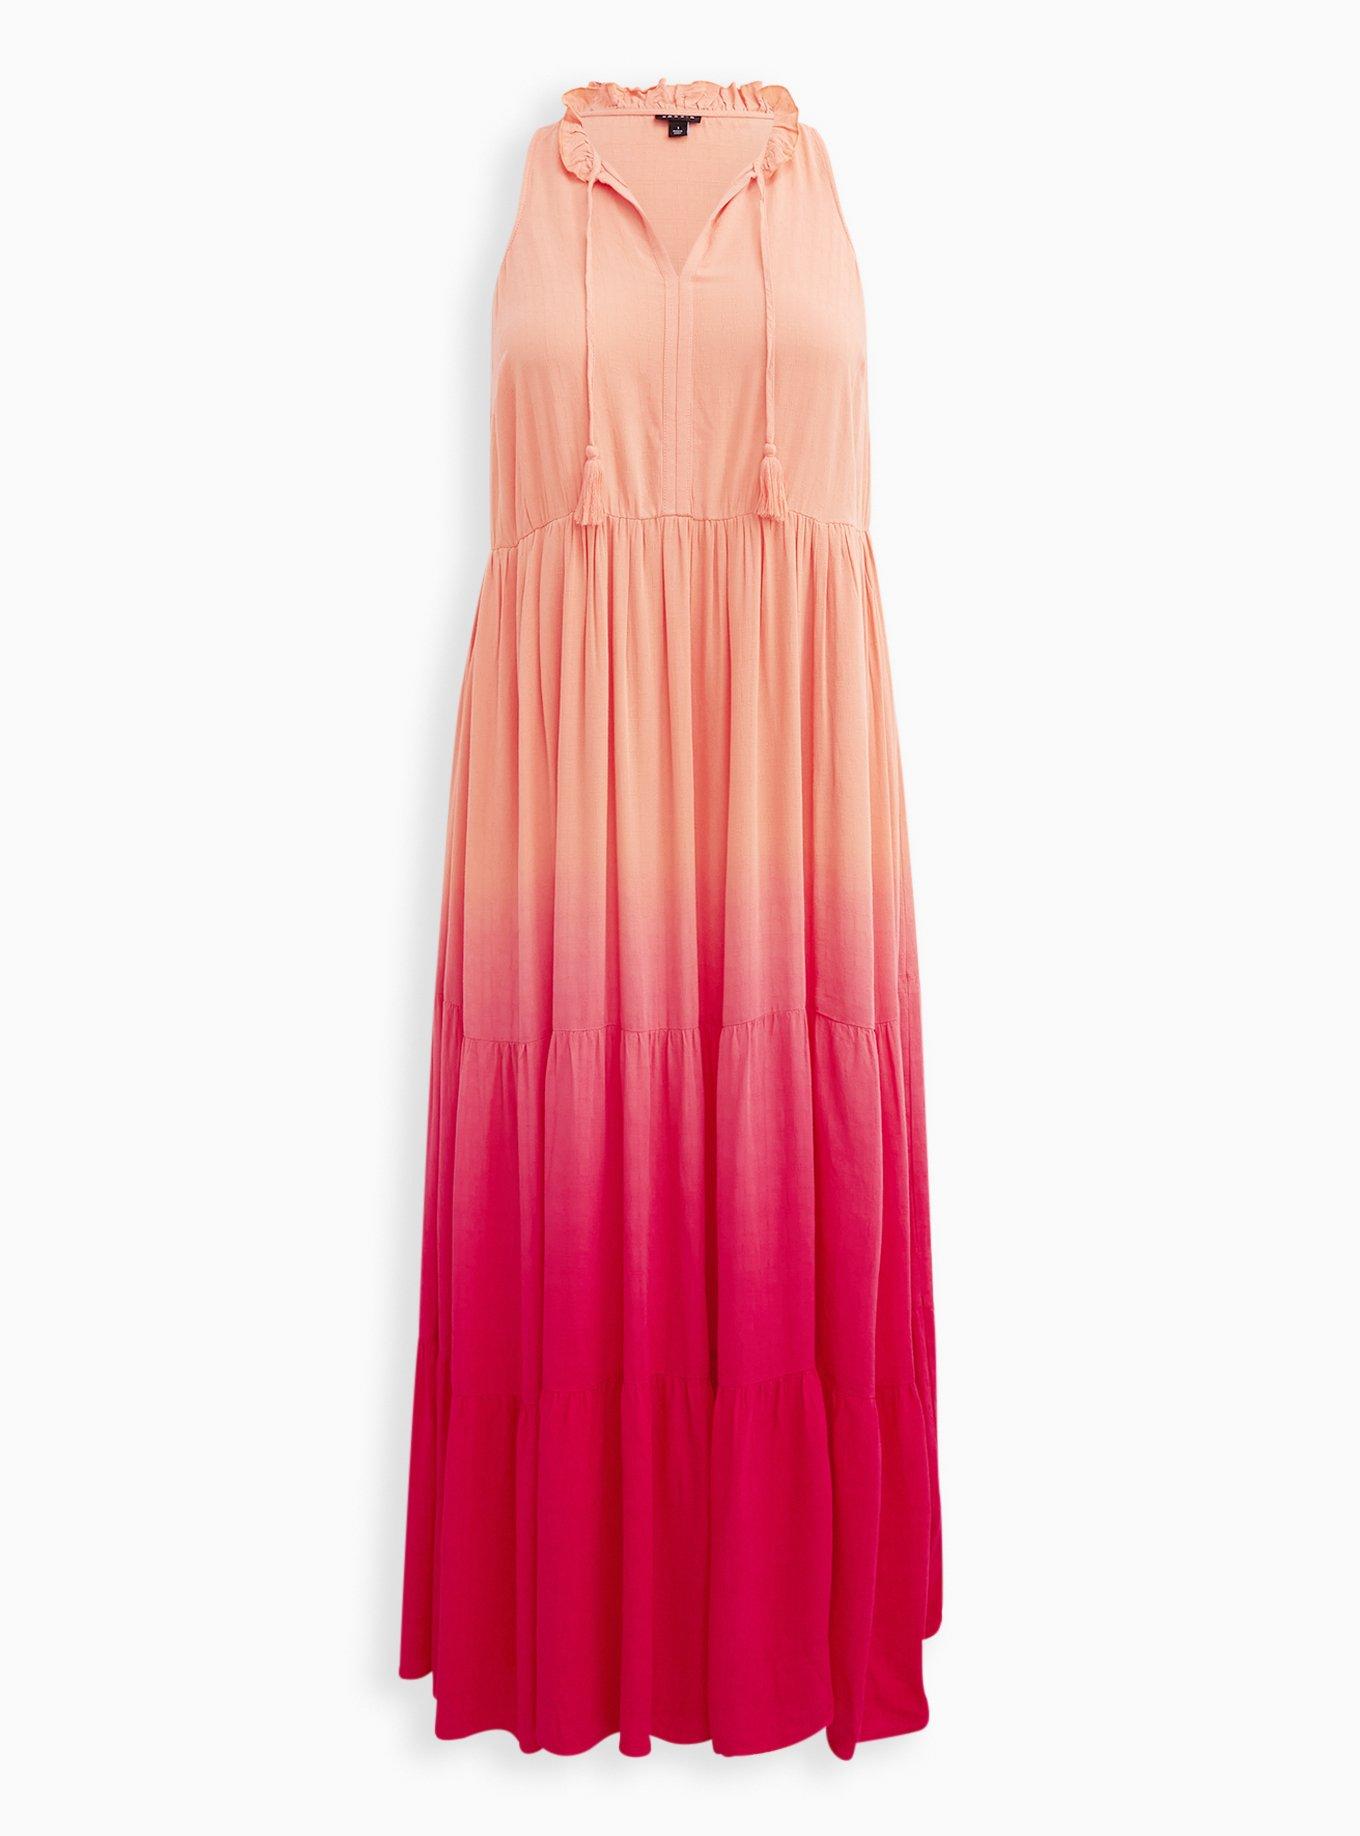 Plus Size - Tiered Maxi Dress - Challis Ombre Red - Torrid